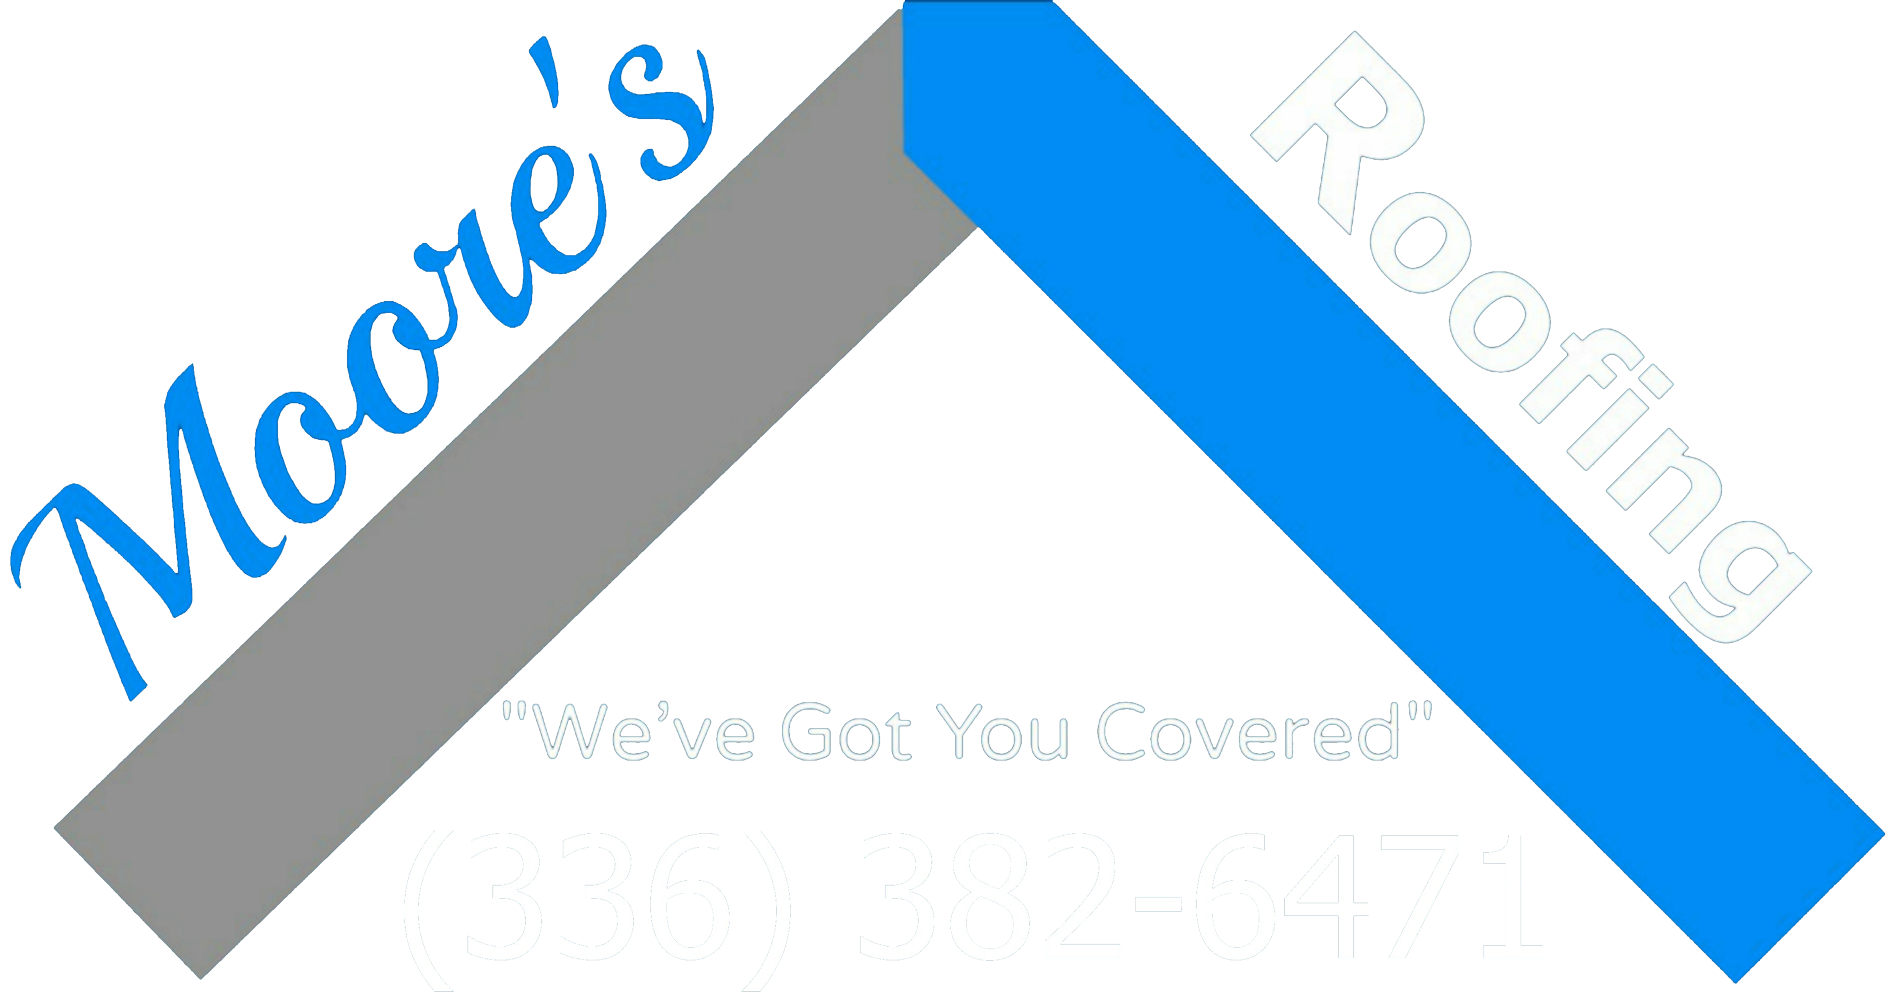 Moore's Roofing